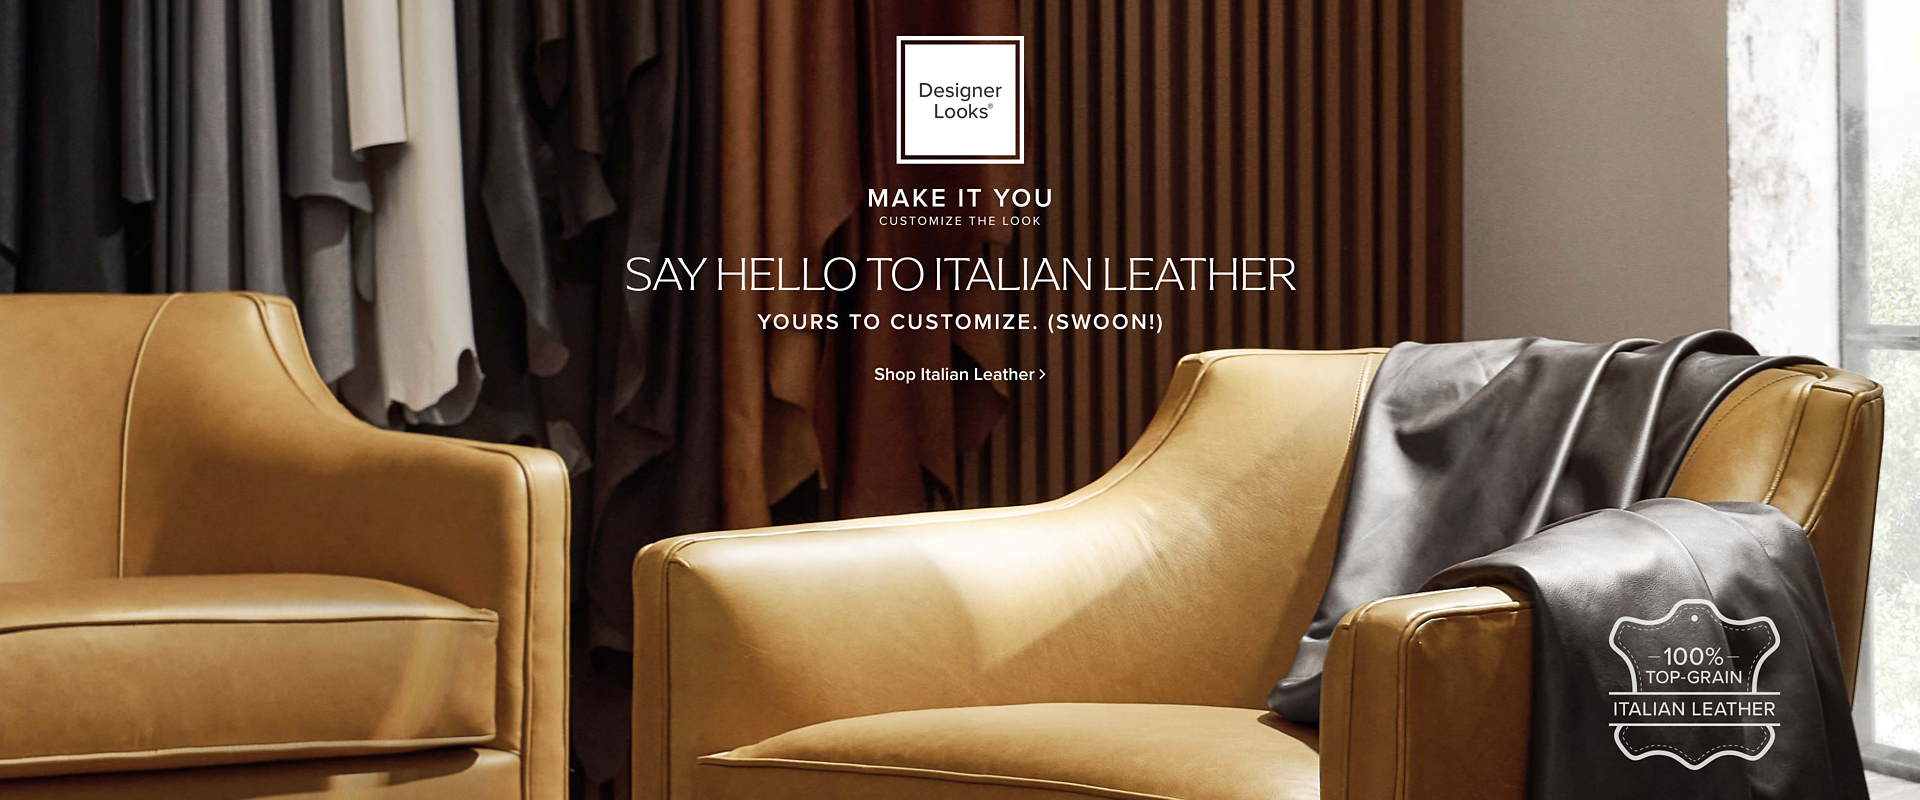 Make It You Customize the look Say Hello to Italian Leather Yours to cusotmize. (Swoon!) Shop Italian Leather